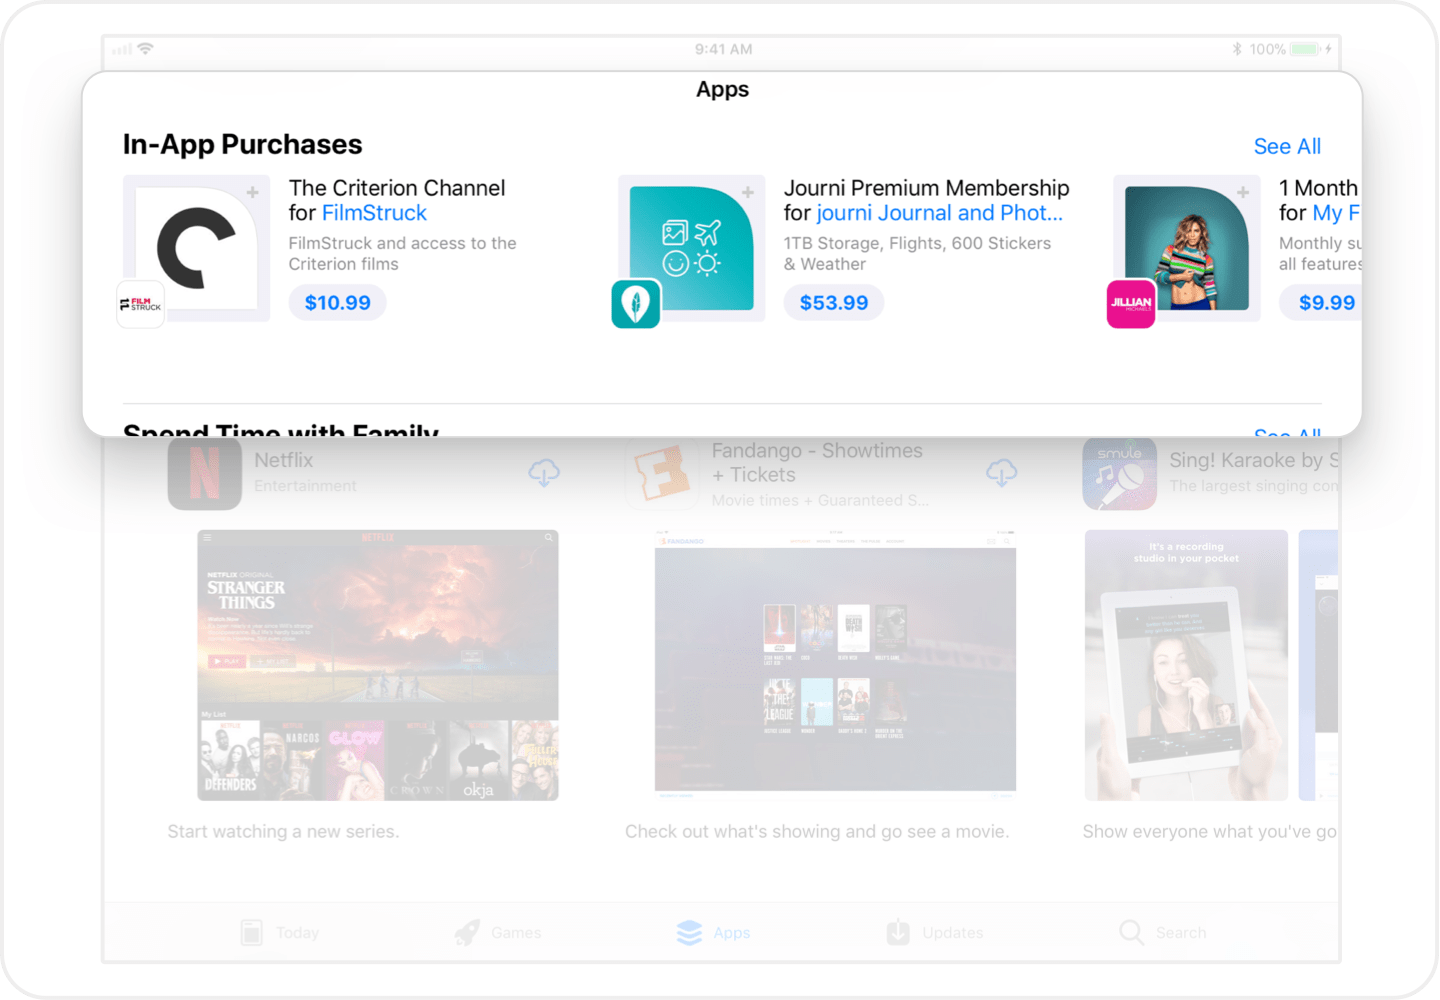  Featured in-app purchases and subscriptions in iOS 11